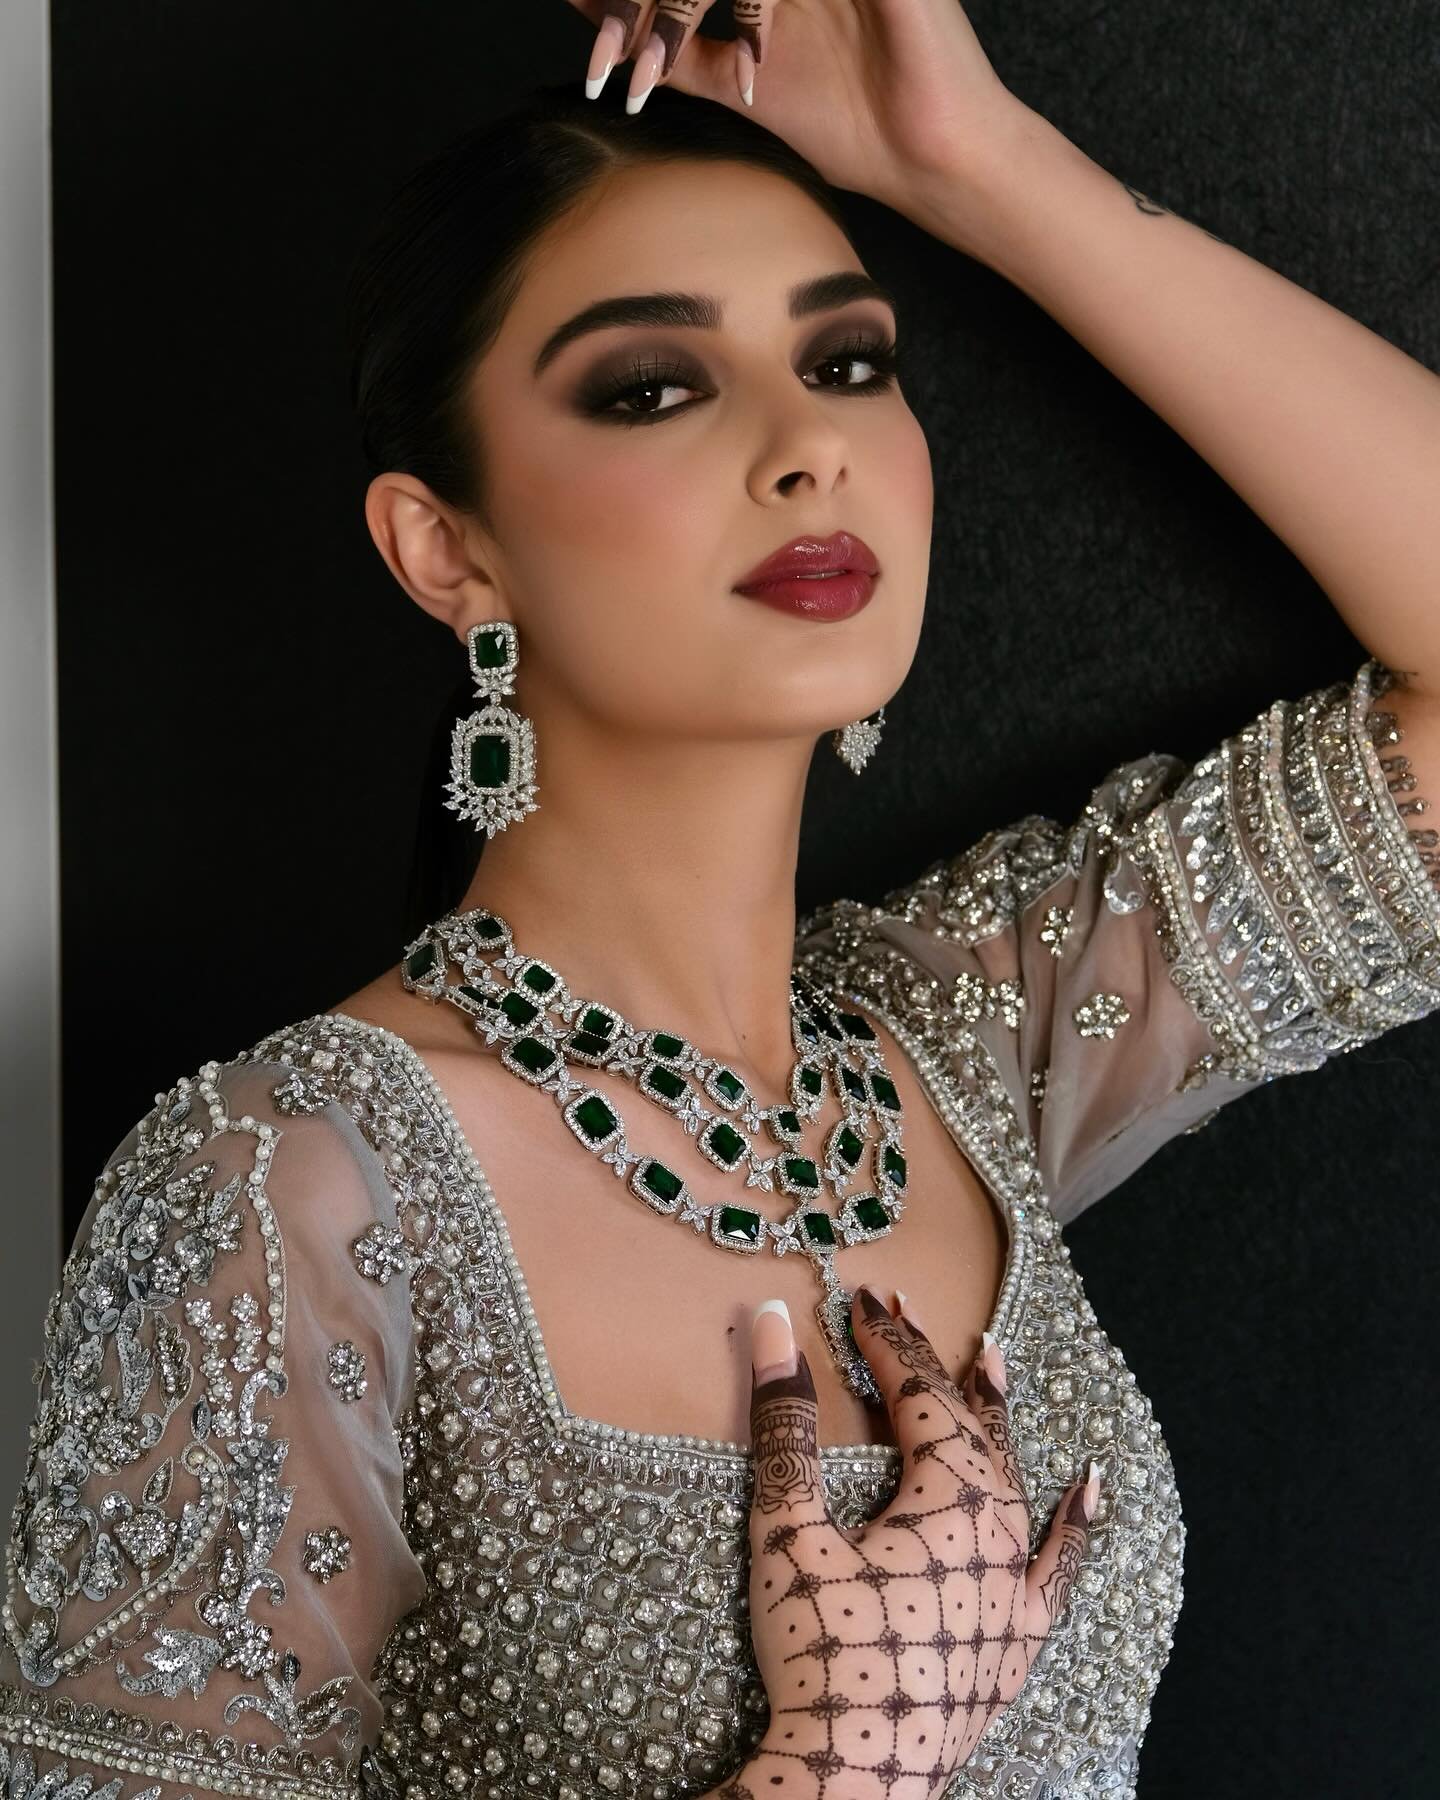 Shimmering nights

Outfit: @vivahcollection 
Jewelry: @vivahcollection 
Model: @taniajohal31 

To book Bridal or Non-Bridal services, please email info@madeinlondonstudio.com